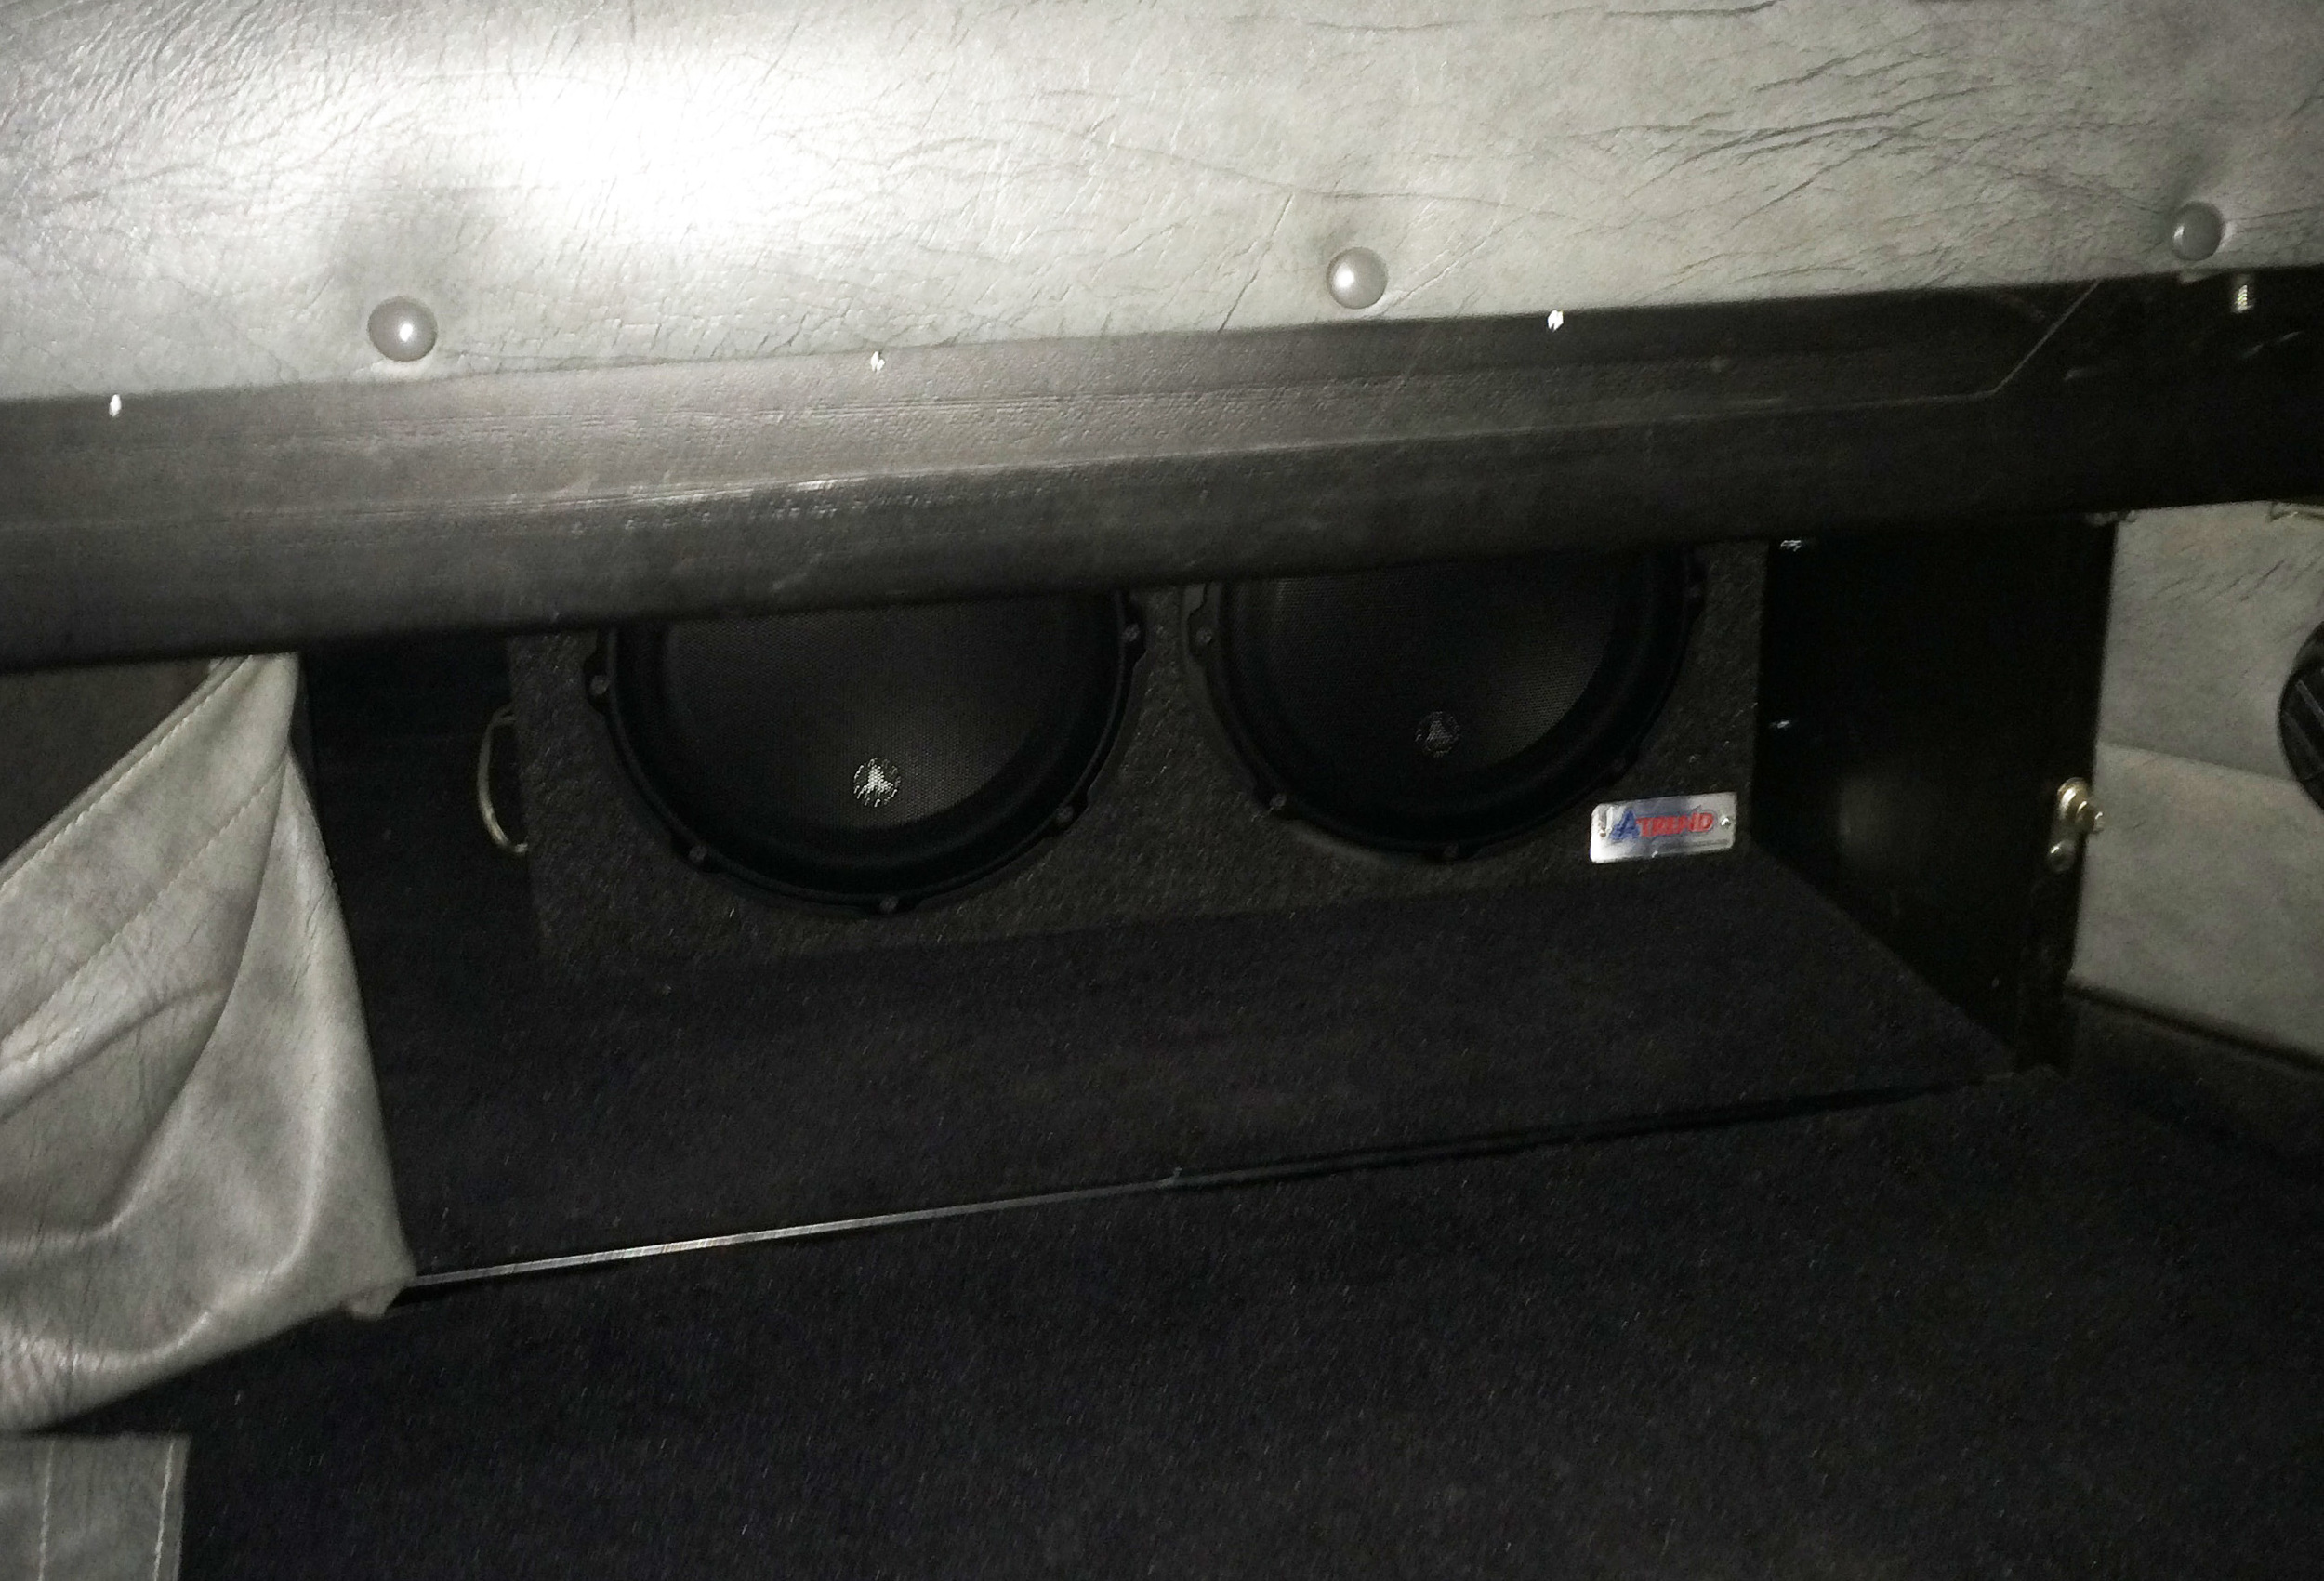 JL Audio 10W3v3 Subwoofers mounted under the sleeper